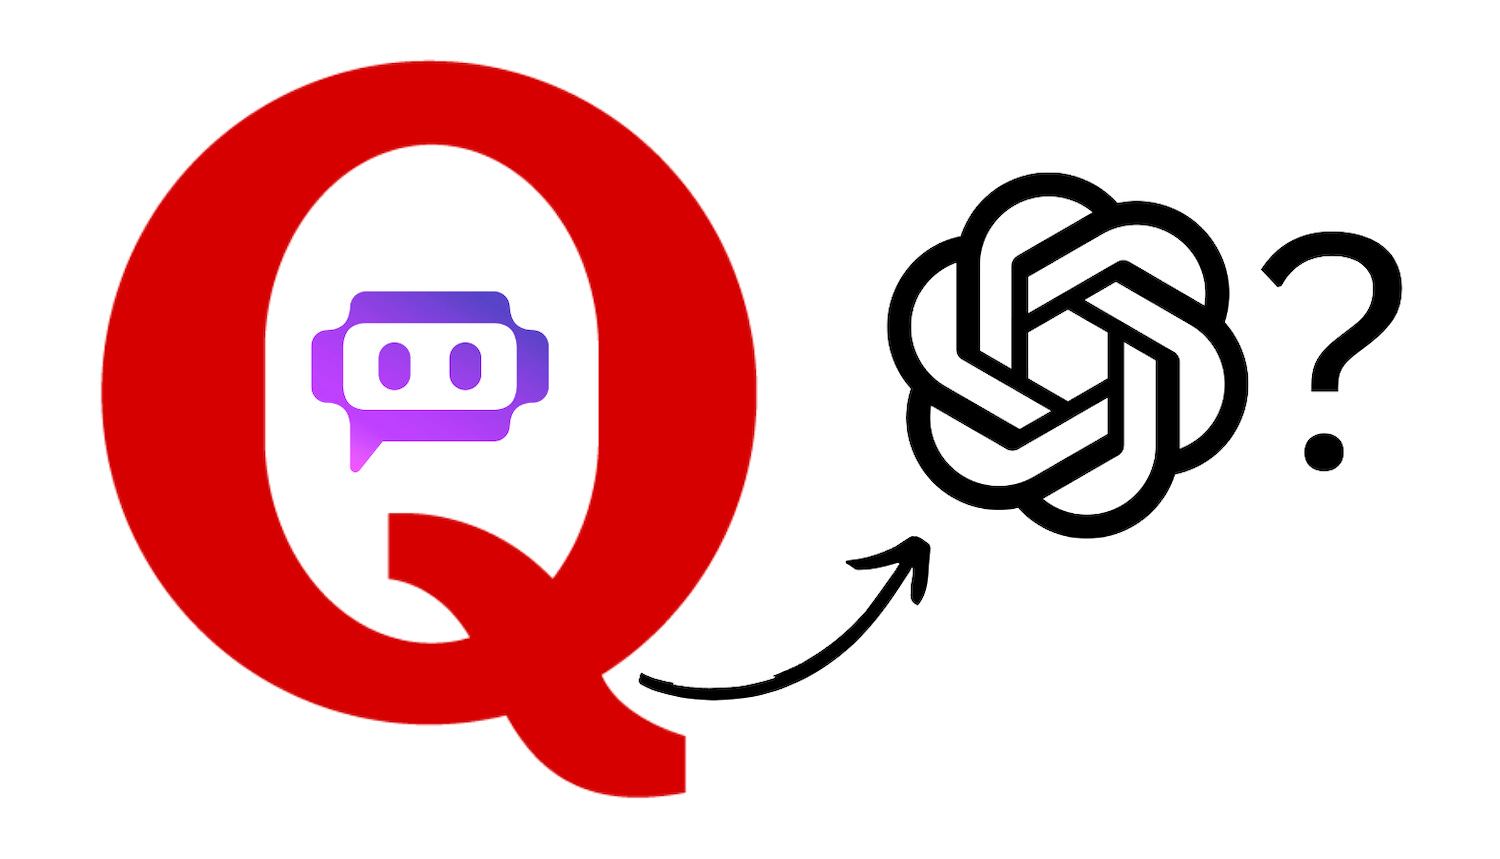 What is Q*? And when we will hear more? - Community - OpenAI